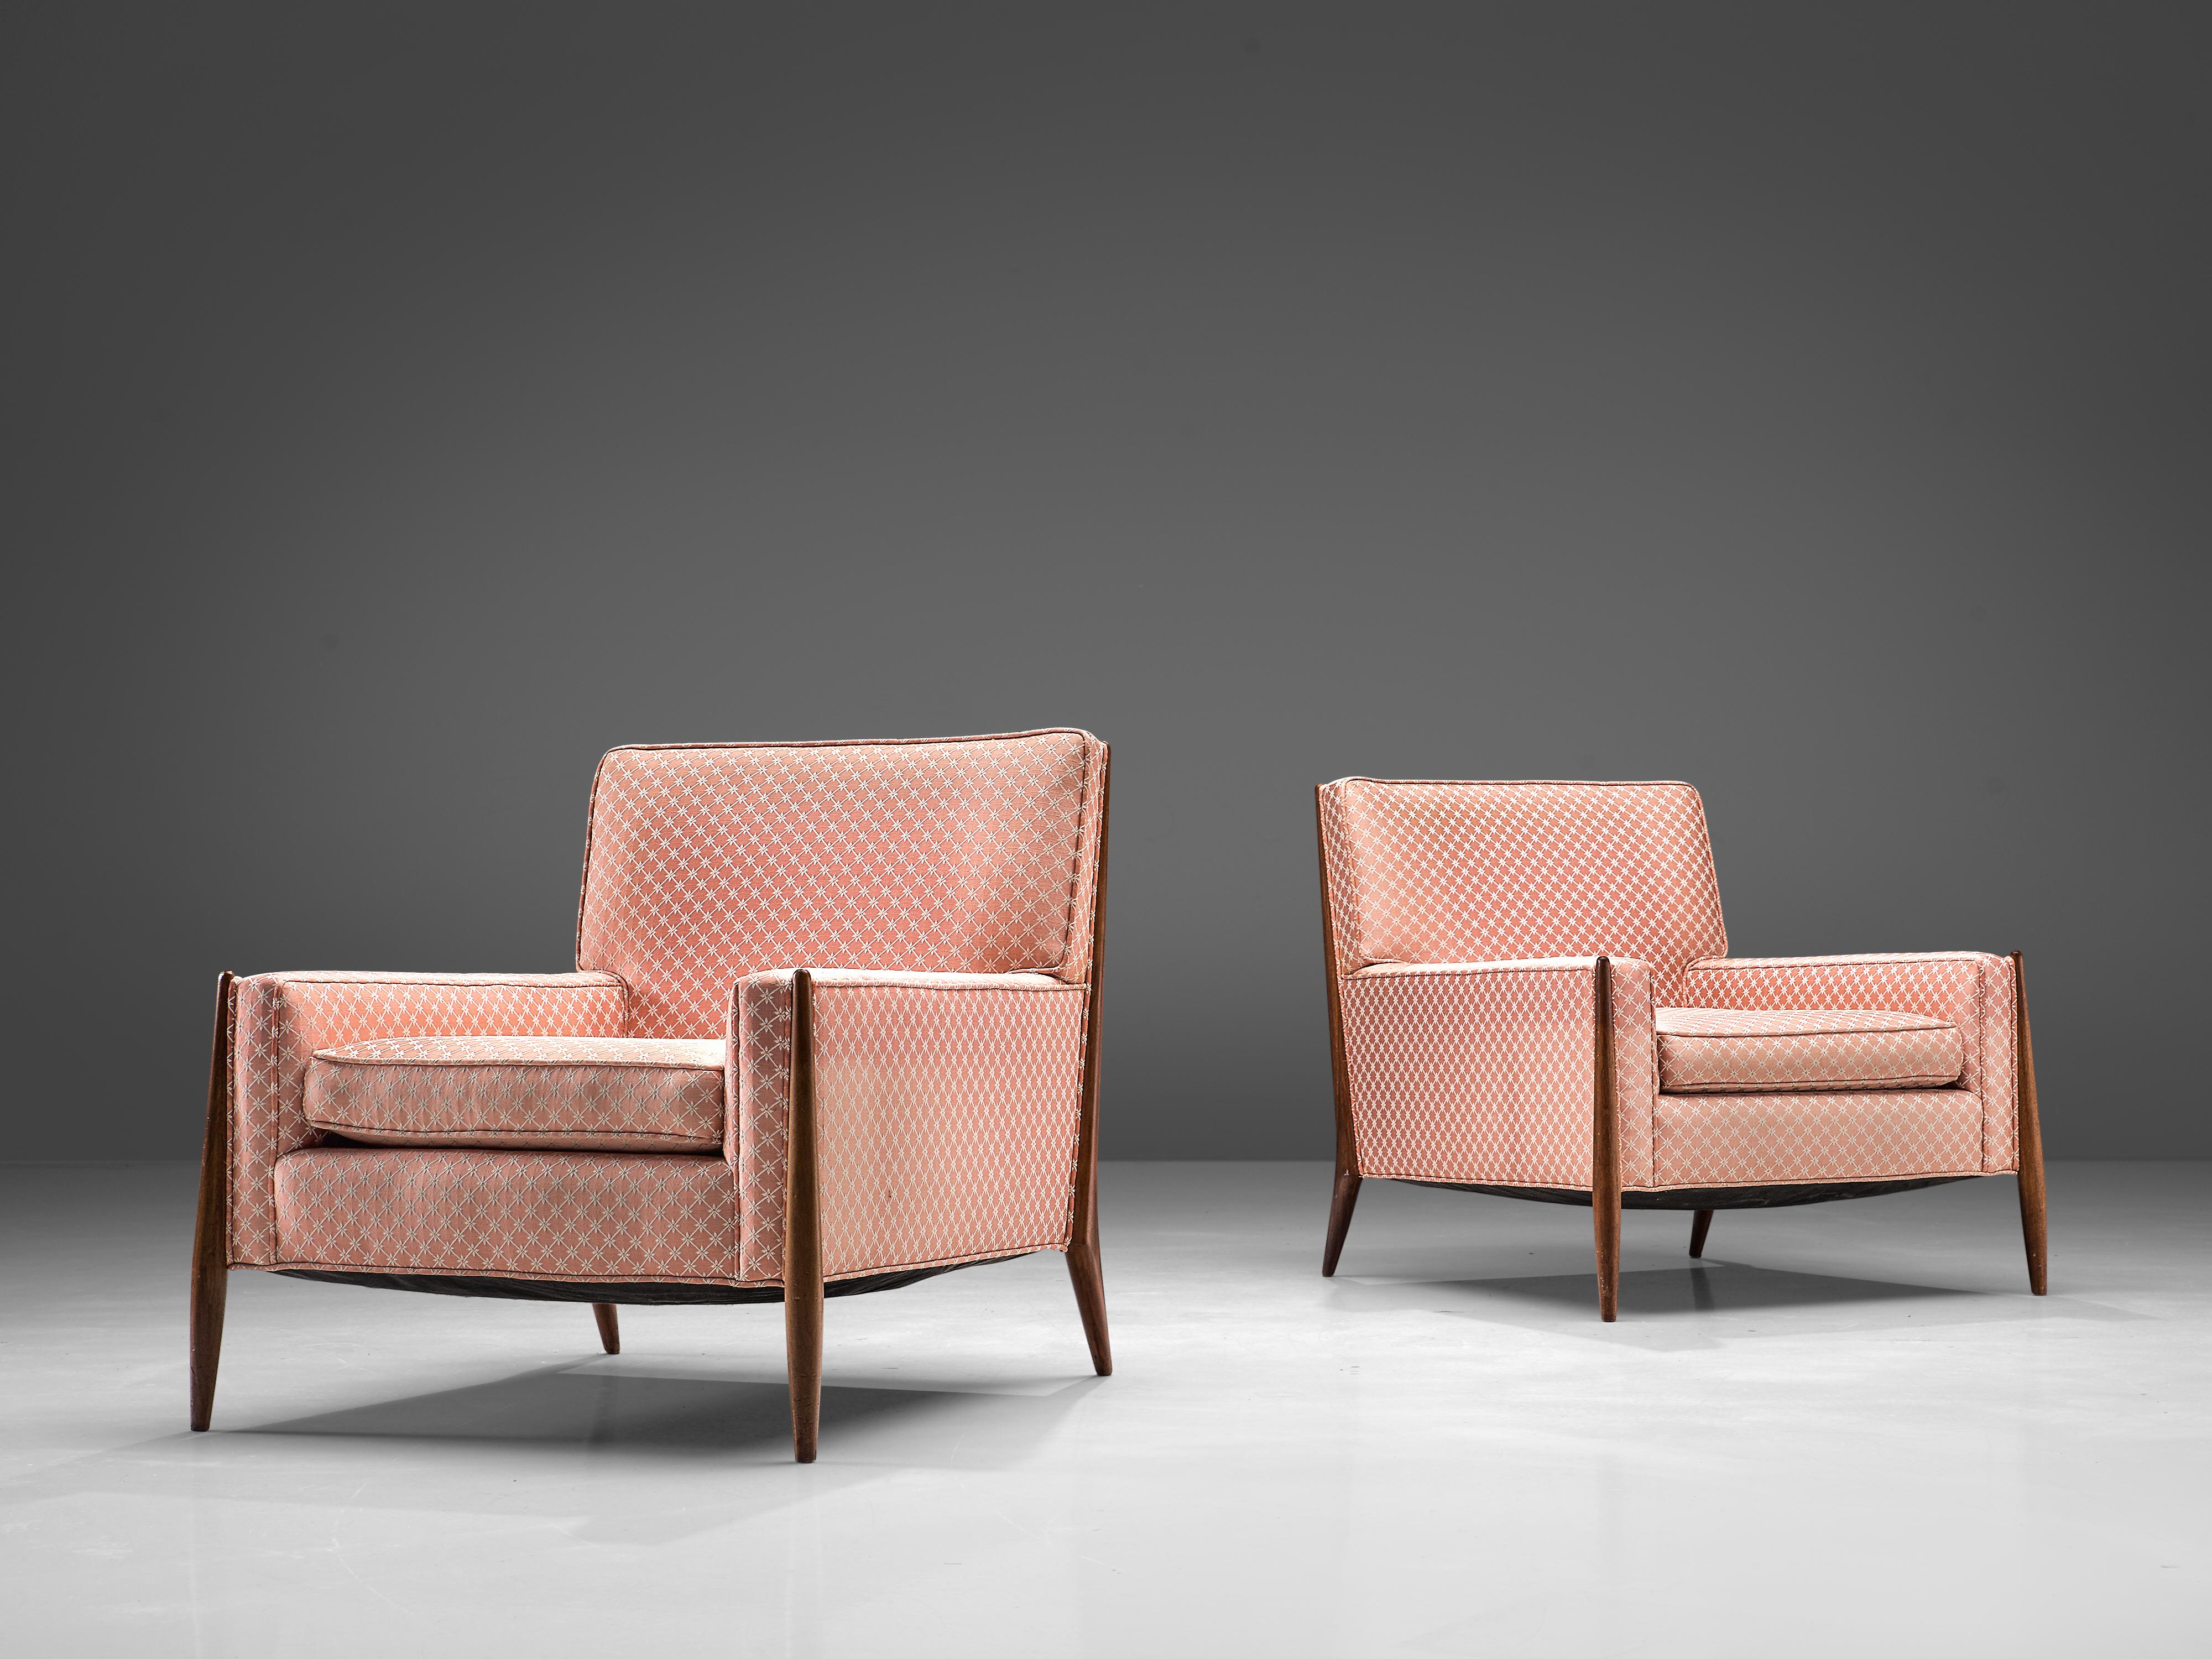 Jules Heumann, set of 2 lounge chairs, fabric and walnut, United States, 1960s.

Pair of Classic midcentury lounge chairs by the American designer Jules Heumann for Metropolitan Furniture. The chairs have Classic midcentury lines and construction.